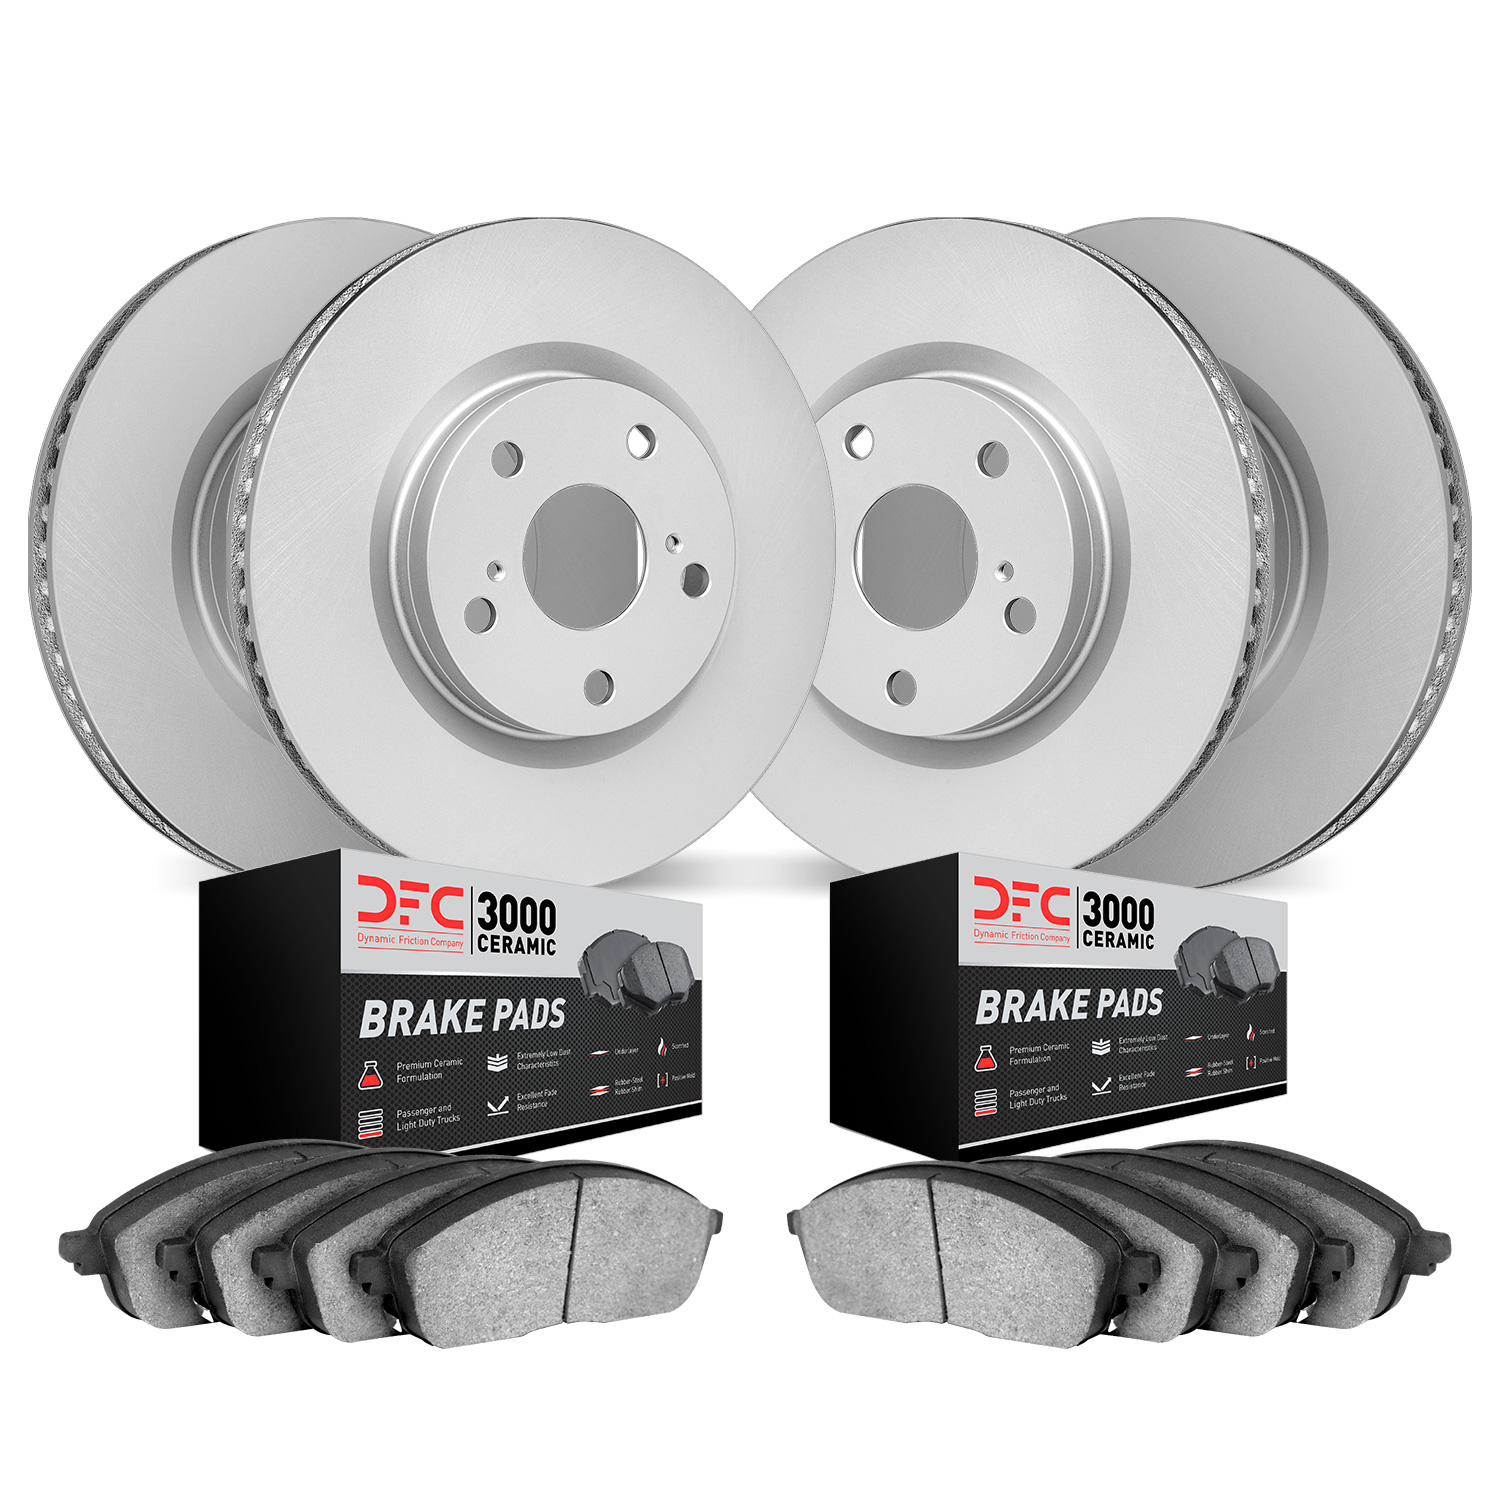 4304-67033 Geospec Brake Rotors with 3000-Series Ceramic Brake Pads Kit, 2009-2021 Infiniti/Nissan, Position: Front and Rear